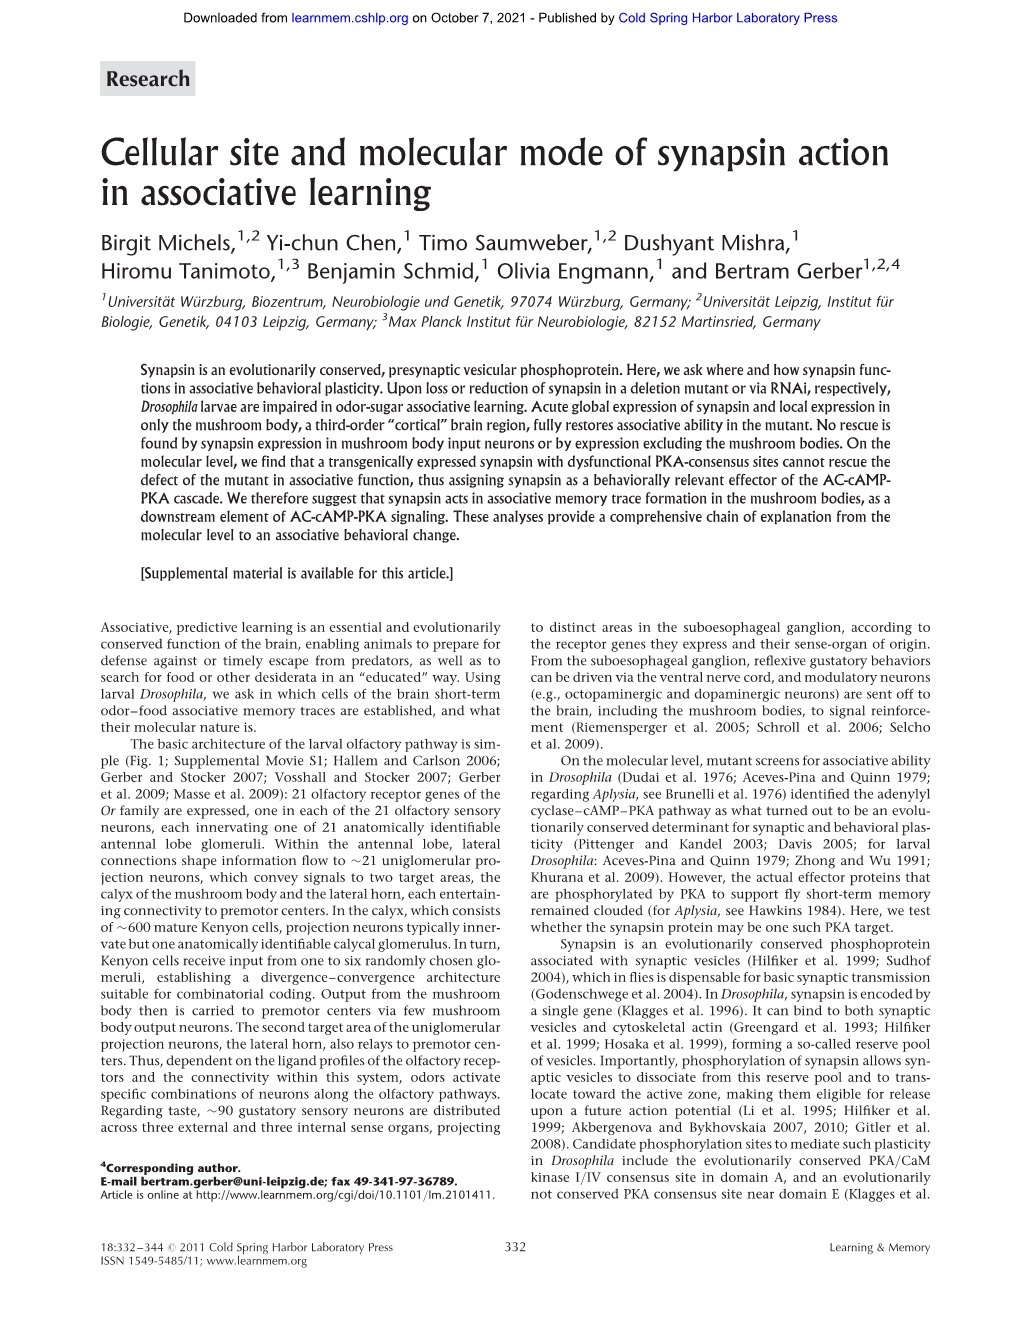 Cellular Site and Molecular Mode of Synapsin Action in Associative Learning